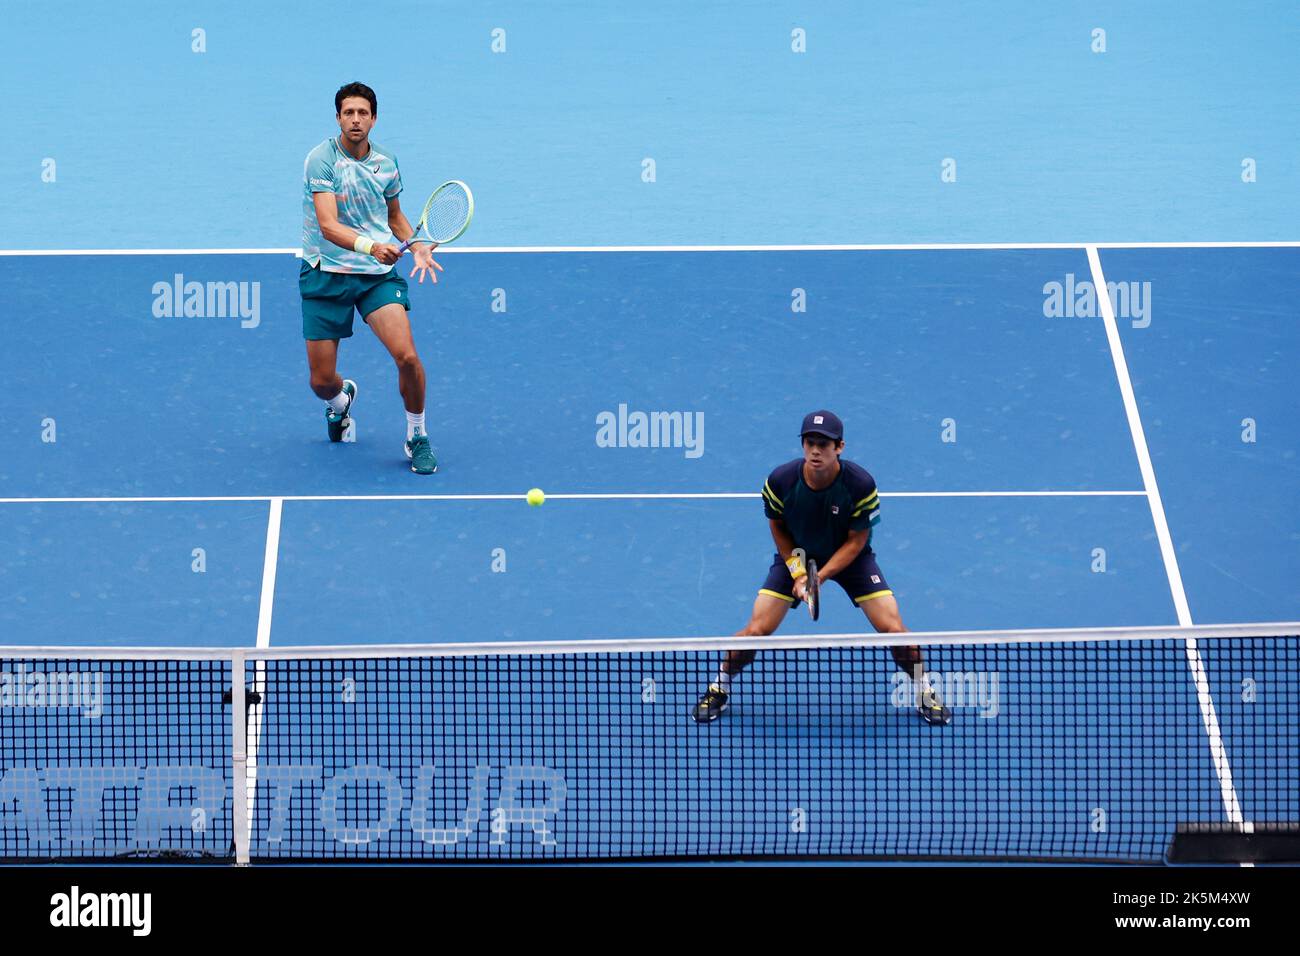 Tokyo, Japan. 9th Oct, 2022. (L to R) Marcelo MELO (BRA) and Mackenzie MCDONALD (USA) in action against Rafael MATOS (BRA) and David VEGA HERNANDEZ (ESP) during their Doubles Final match at the Rakuten Japan Open Tennis Championships 2022 at Ariake Coliseum. The tournament is held from October 1 to 9. M. McDonald and M. Melo won 6:4, 3:6, 10:4. (Credit Image: © Rodrigo Reyes Marin/ZUMA Press Wire) Credit: ZUMA Press, Inc./Alamy Live News Stock Photo